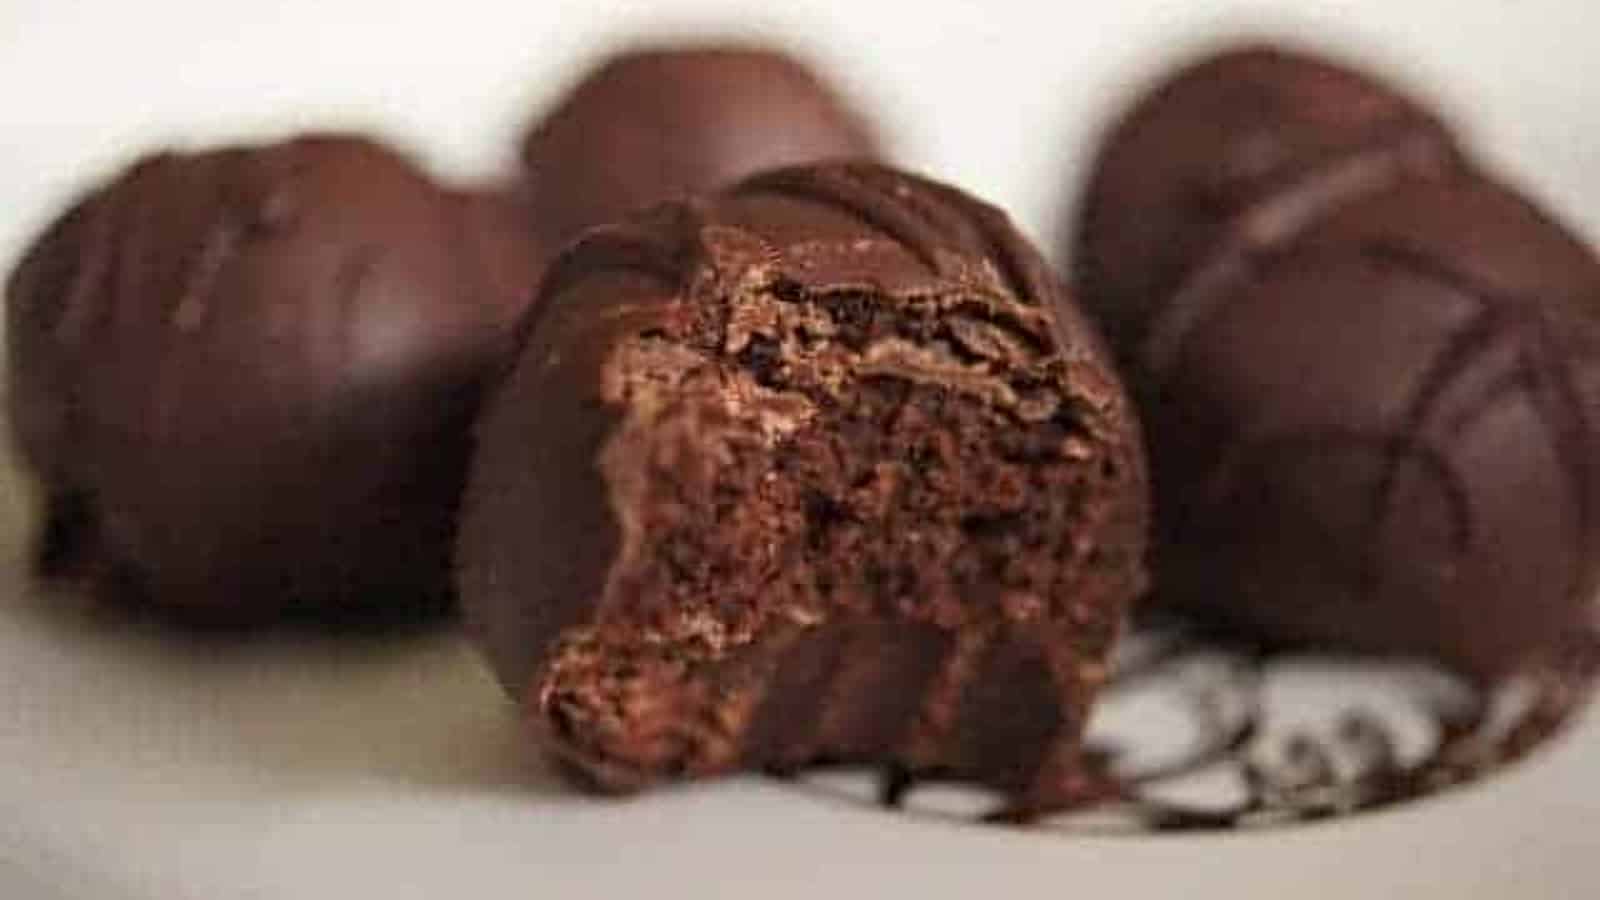 Image shows a brownie batter truffle on a plate with a bite taken from it and more behind it.